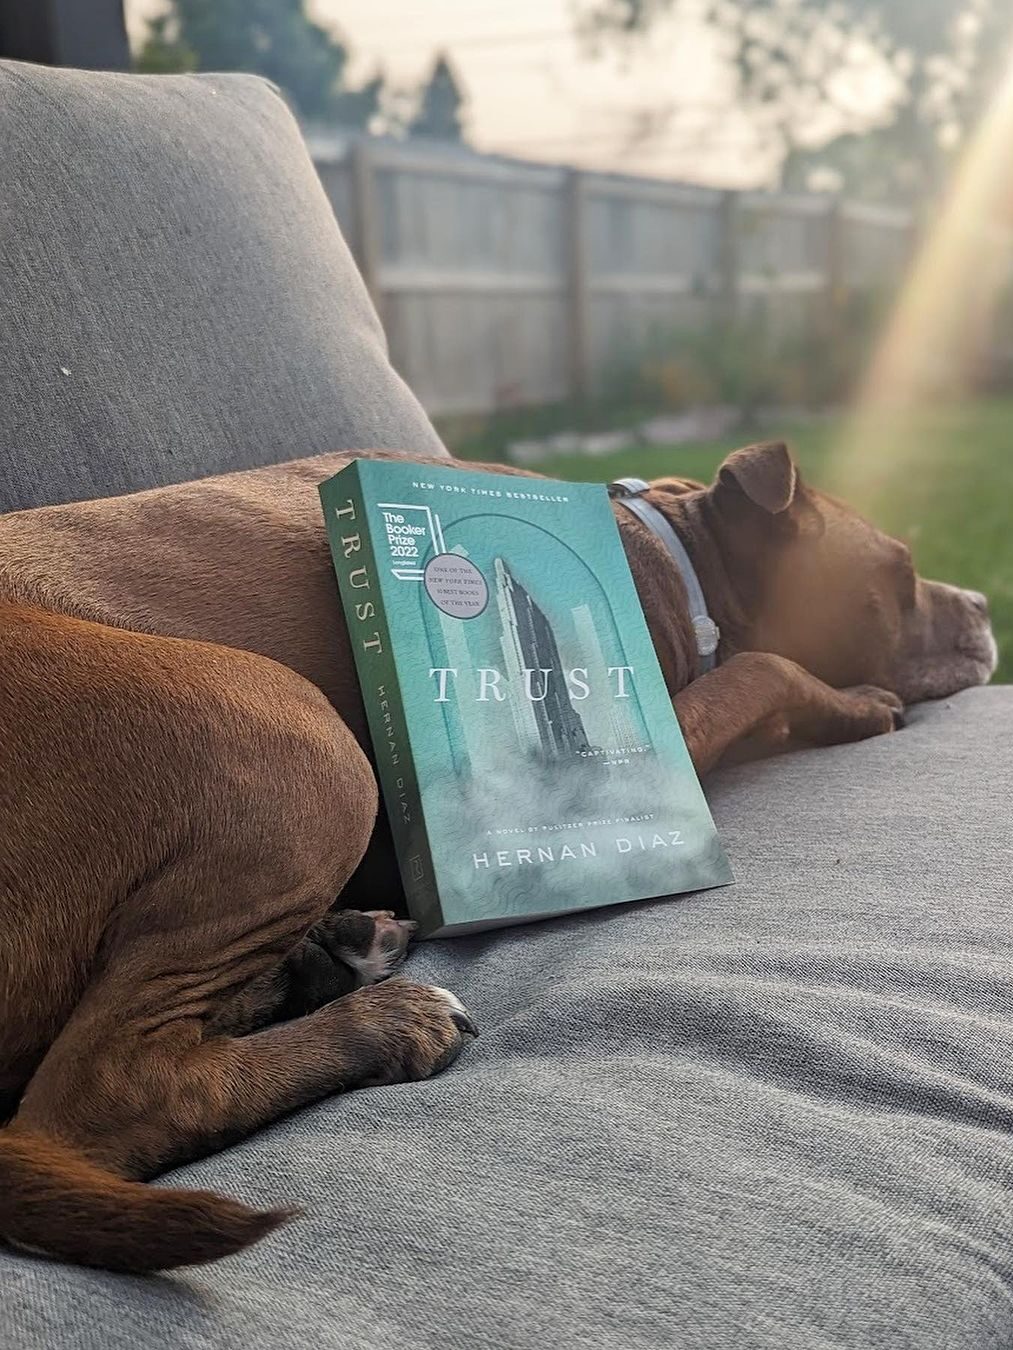 The book "Trust" by Hernan Diaz leaned against a resting dog.